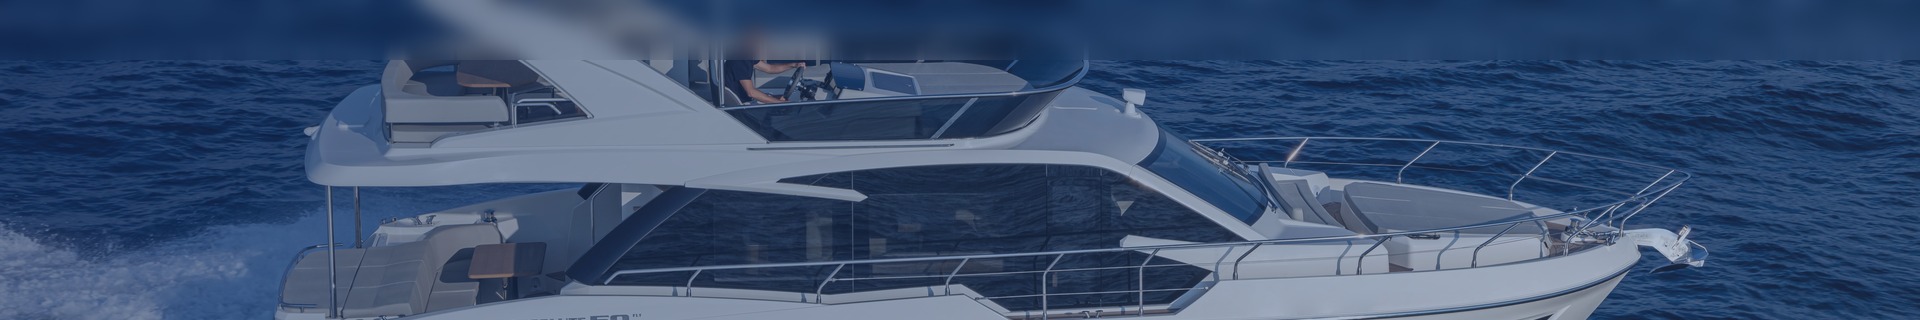 Absolute 50 Fly | For Sale | Elegant Yachts